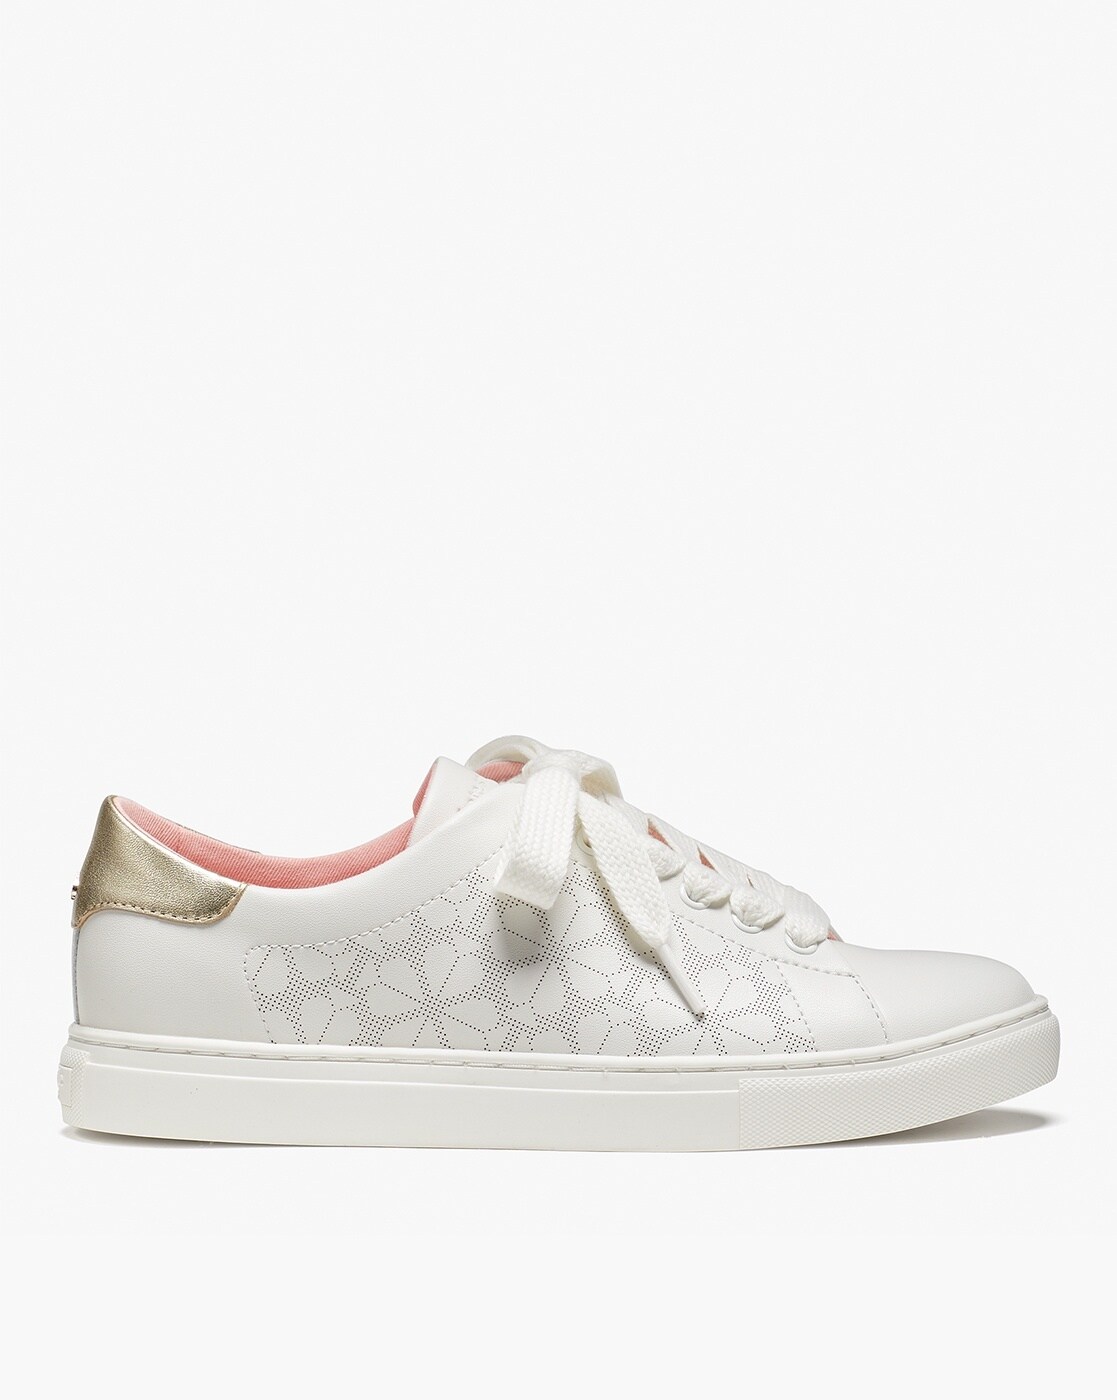 kate spade new york Women's Signature Lace-Up Sneakers - Macy's